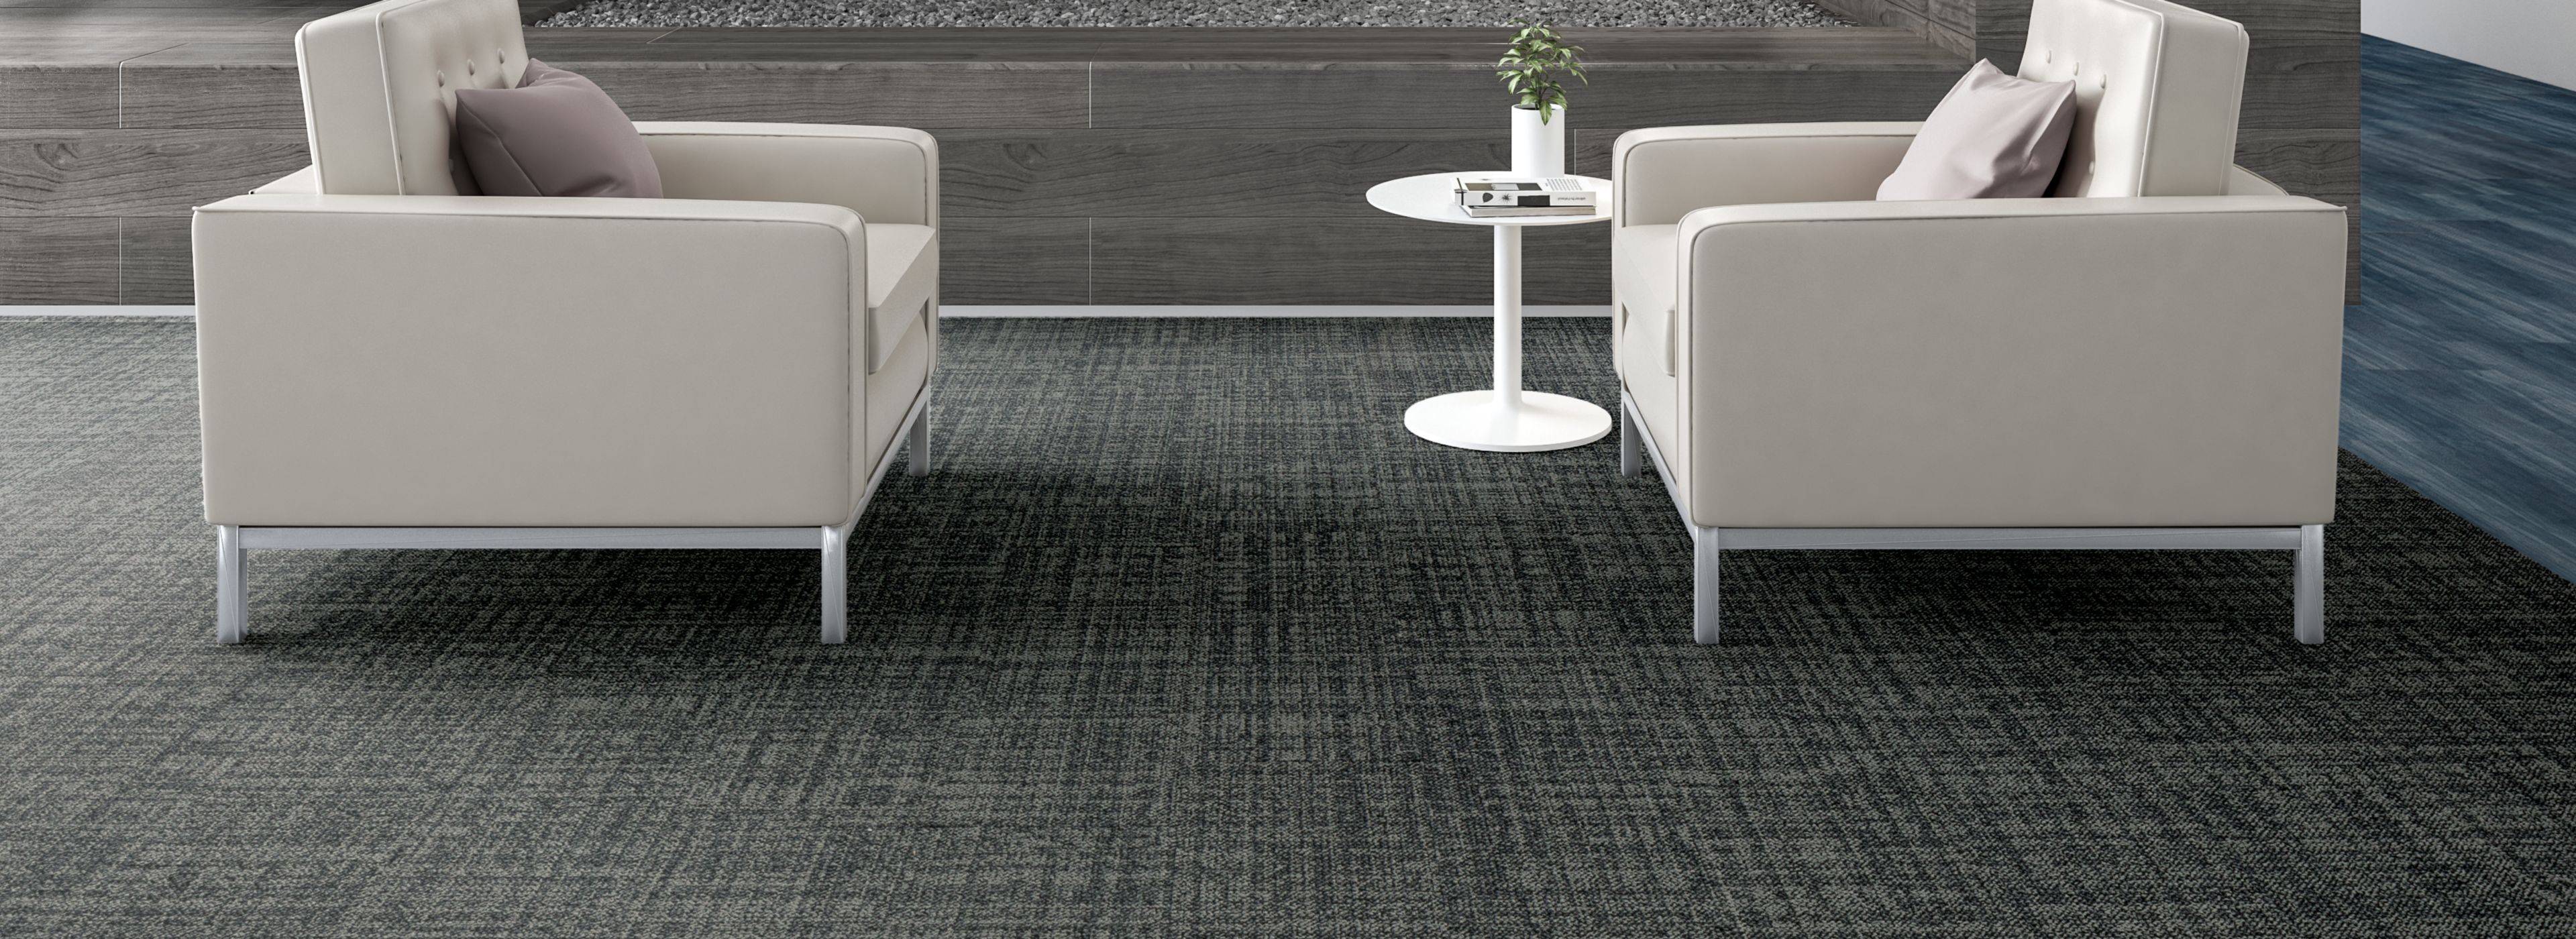 Interface Source Material plank carpet tile and Studio Set plank LVT in lobby with two white chairs and stairs image number 1